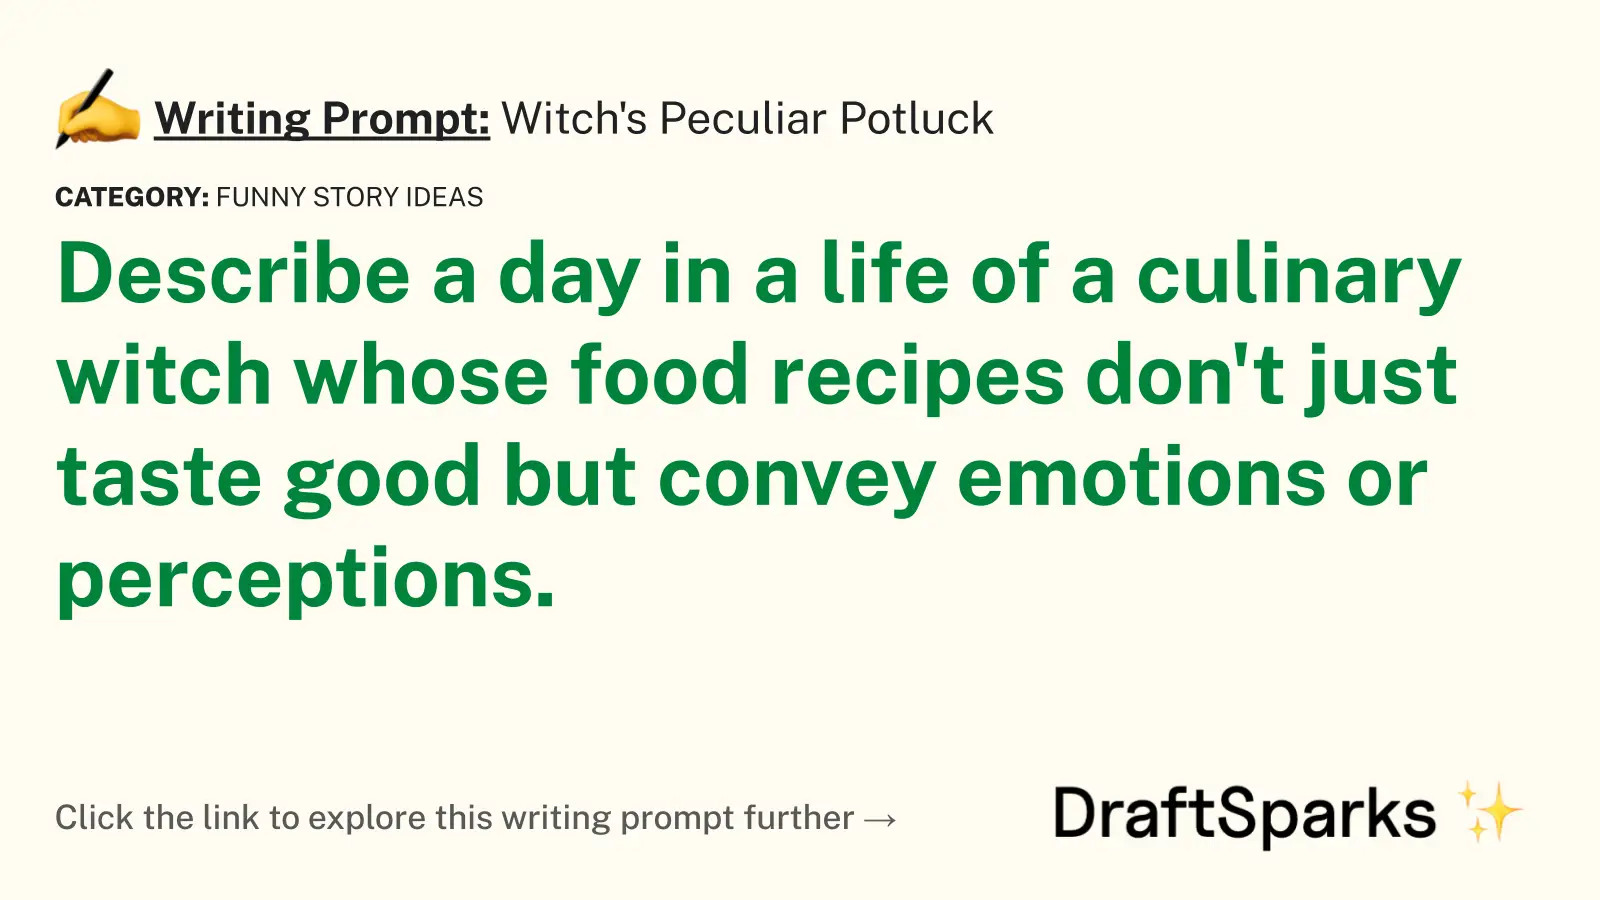 Witch’s Peculiar Potluck